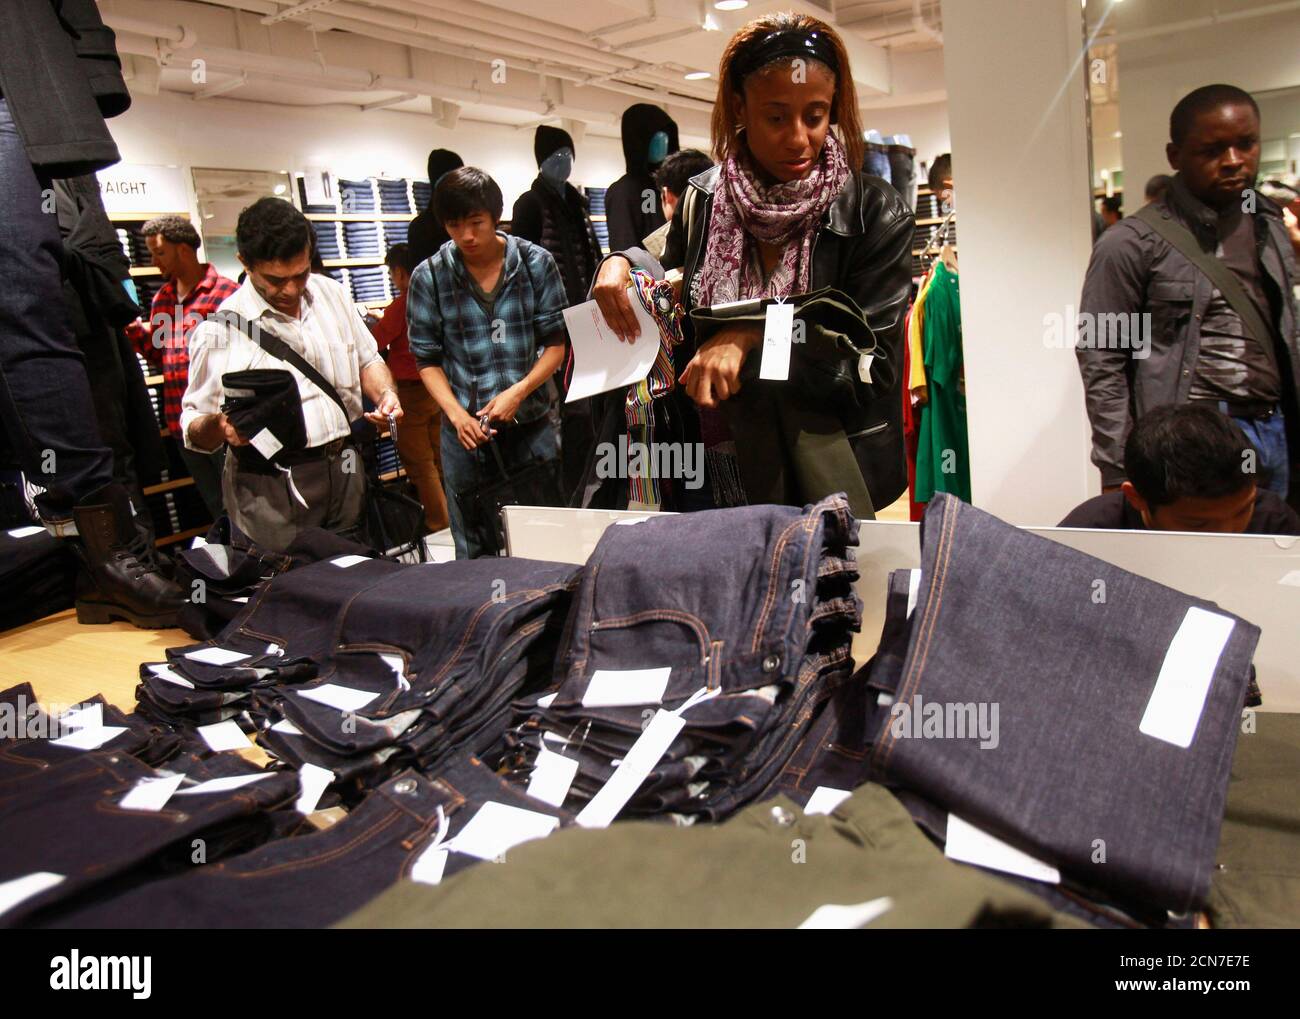 People shop at the Uniqlo store during the Black Friday sales event at  Roosevelt Field Mall in Garden City, New York, U.S., November 29, 2019.  REUTERS/Shannon Stapleton Stock Photo - Alamy